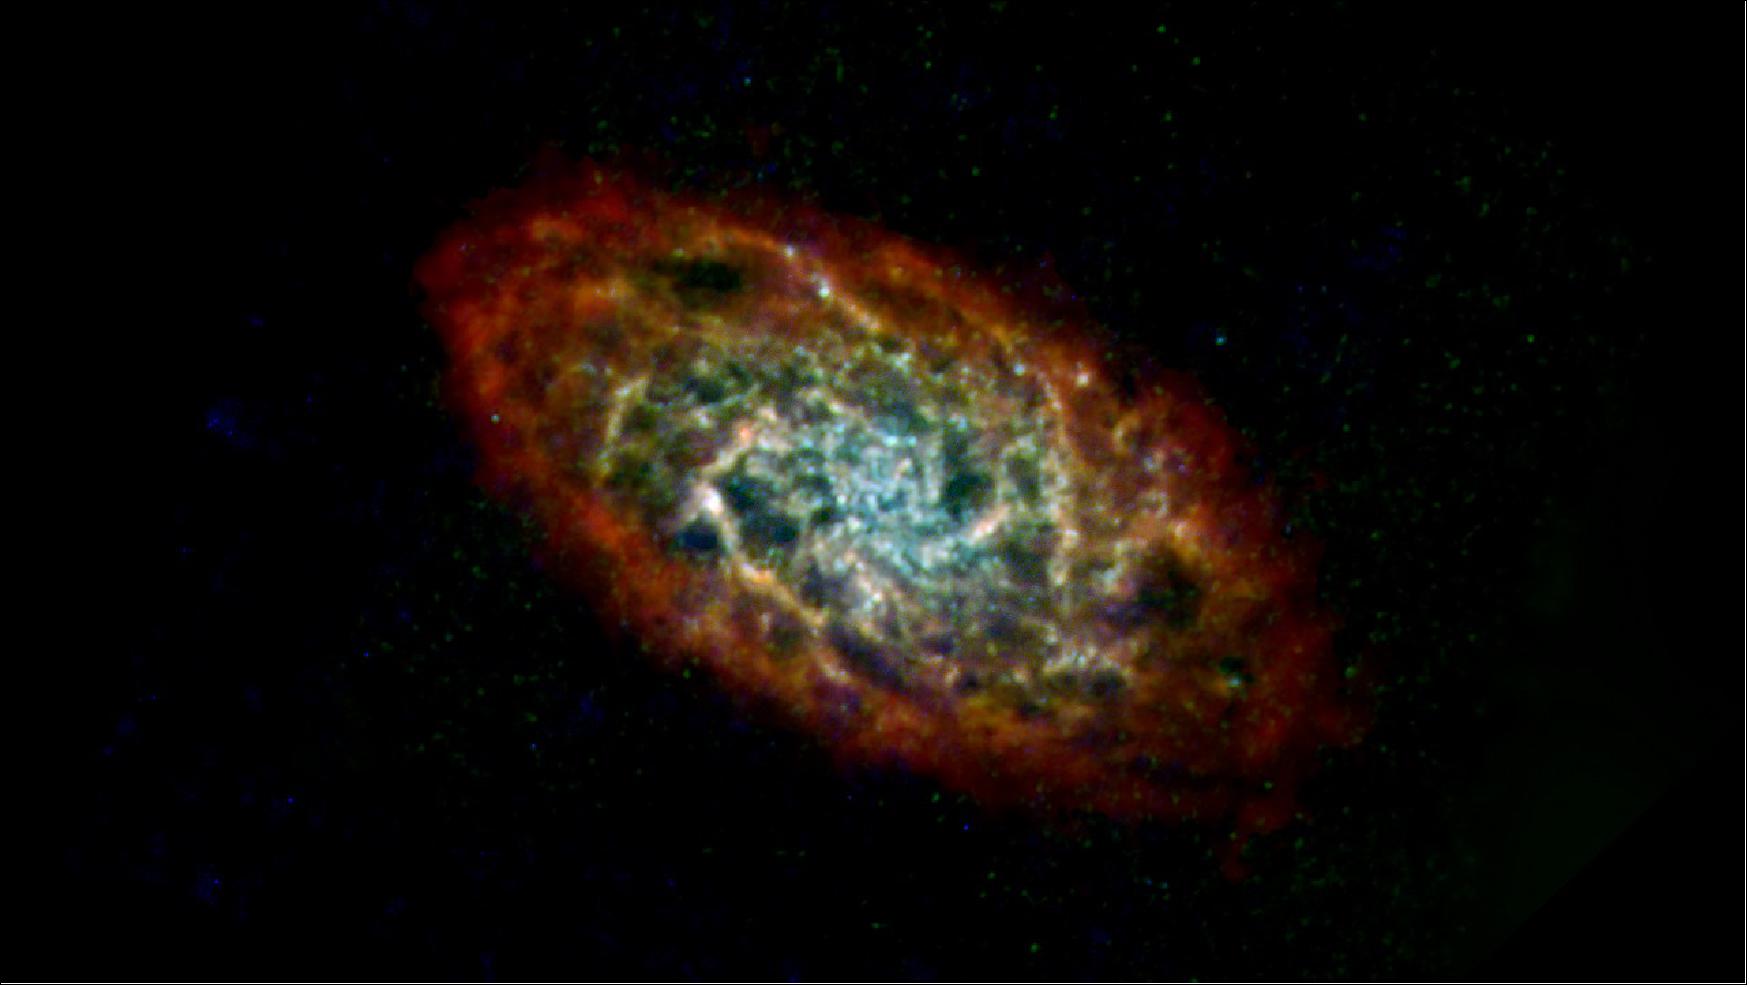 Figure 20: The Triangulum galaxy, or M33, is shown here in far-infrared and radio wavelengths of light. Some of the hydrogen gas (red) that traces the edge of the Triangulum’s disc was pulled in from intergalactic space, and some was torn away from galaxies that merged with Triangulum far in the past. The image is composed of data from the European Space Agency (ESA) Herschel mission, supplemented with data from ESA’s retired Planck observatory and two retired NASA missions: the Infrared Astronomy Survey and Cosmic Background Explorer, as well as the Very Large Array, Green Bank Telescope, and IRAM radio telescope [image credits: ESA, NASA, NASA-JPL, Caltech, Christopher Clark (STScI), E. Koch (University of Alberta), C. Druard (University of Bordeaux)]